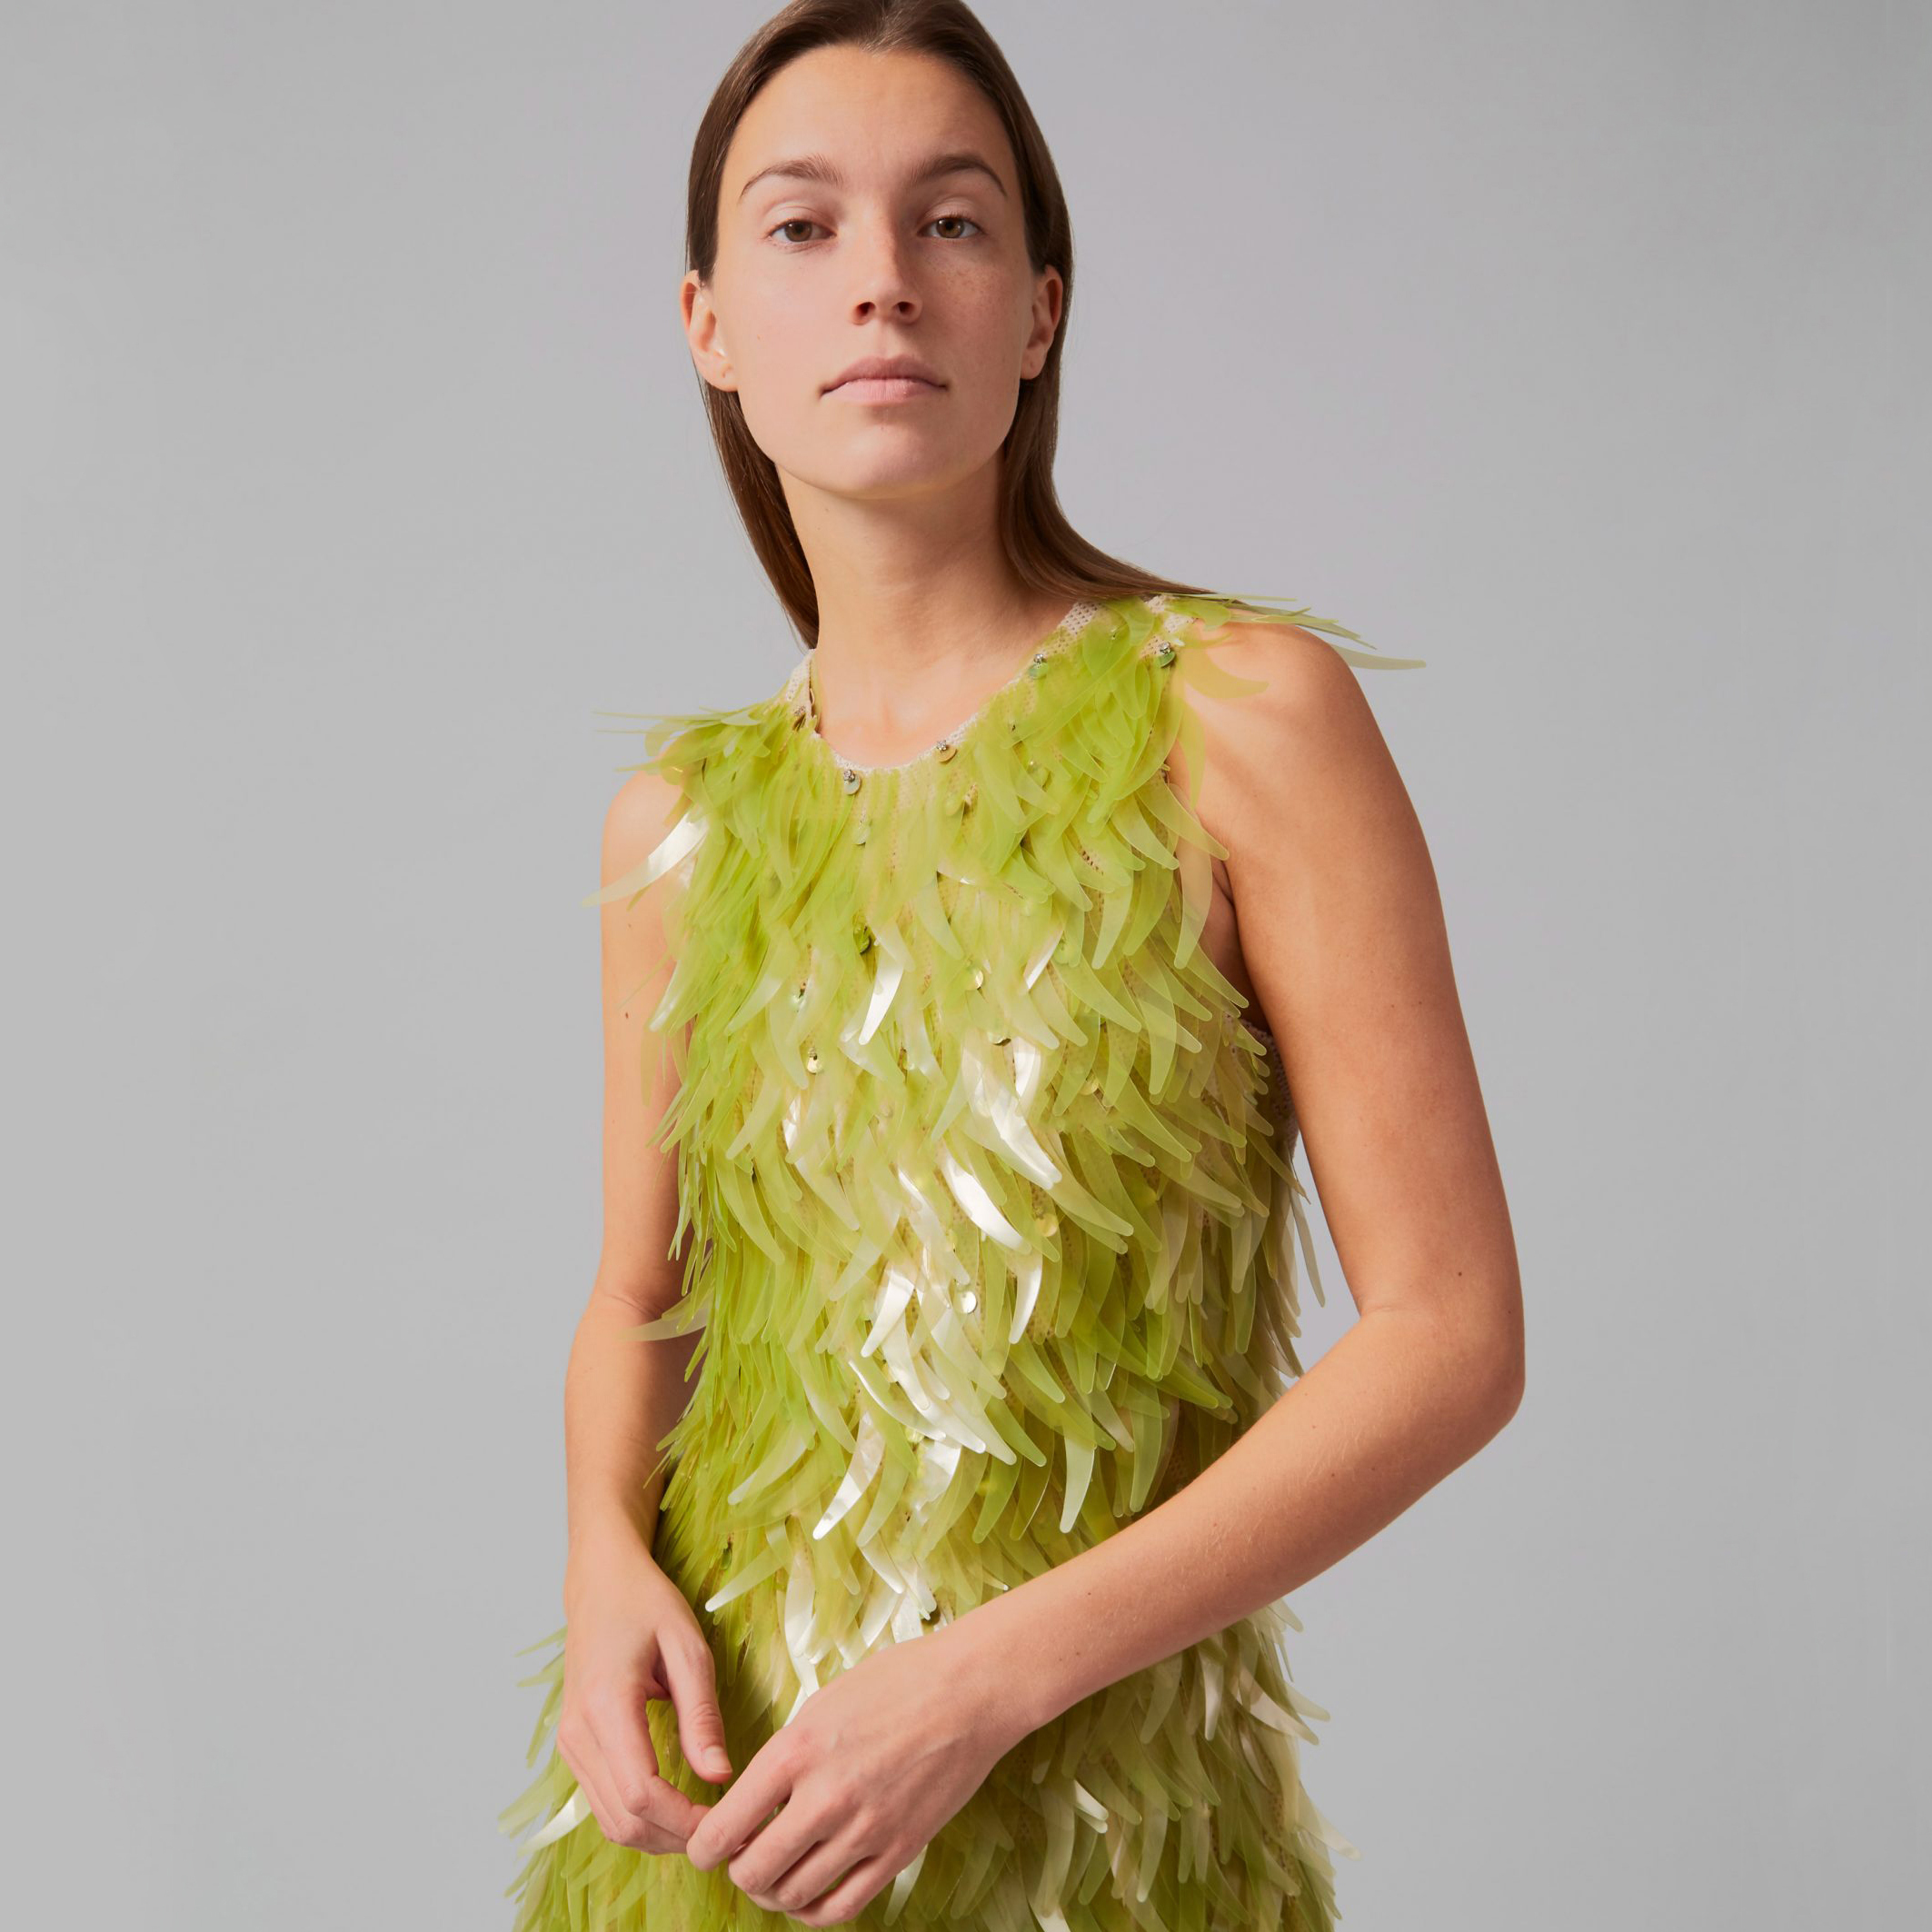 Phillip Lim and Charlotte McCurdy adorn couture dress with algae